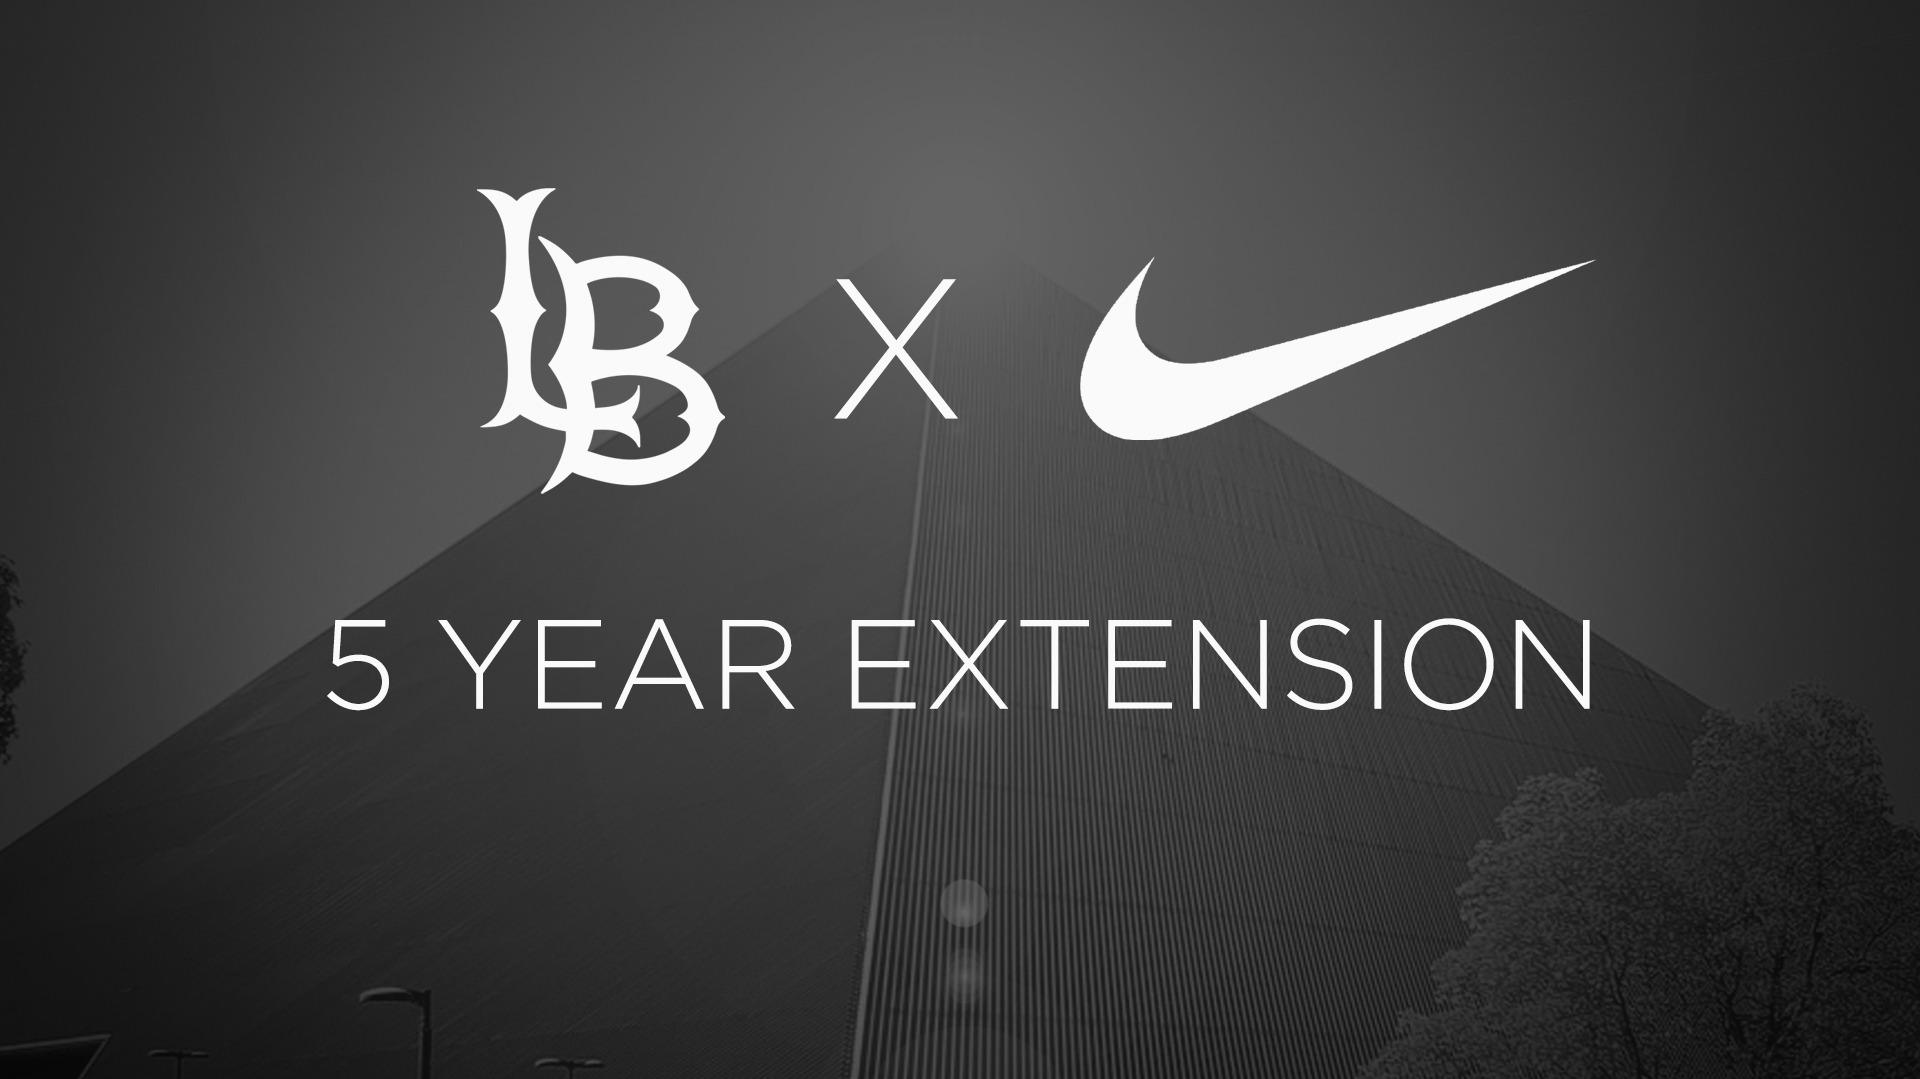 Long Beach State Continues Partnership With Nike